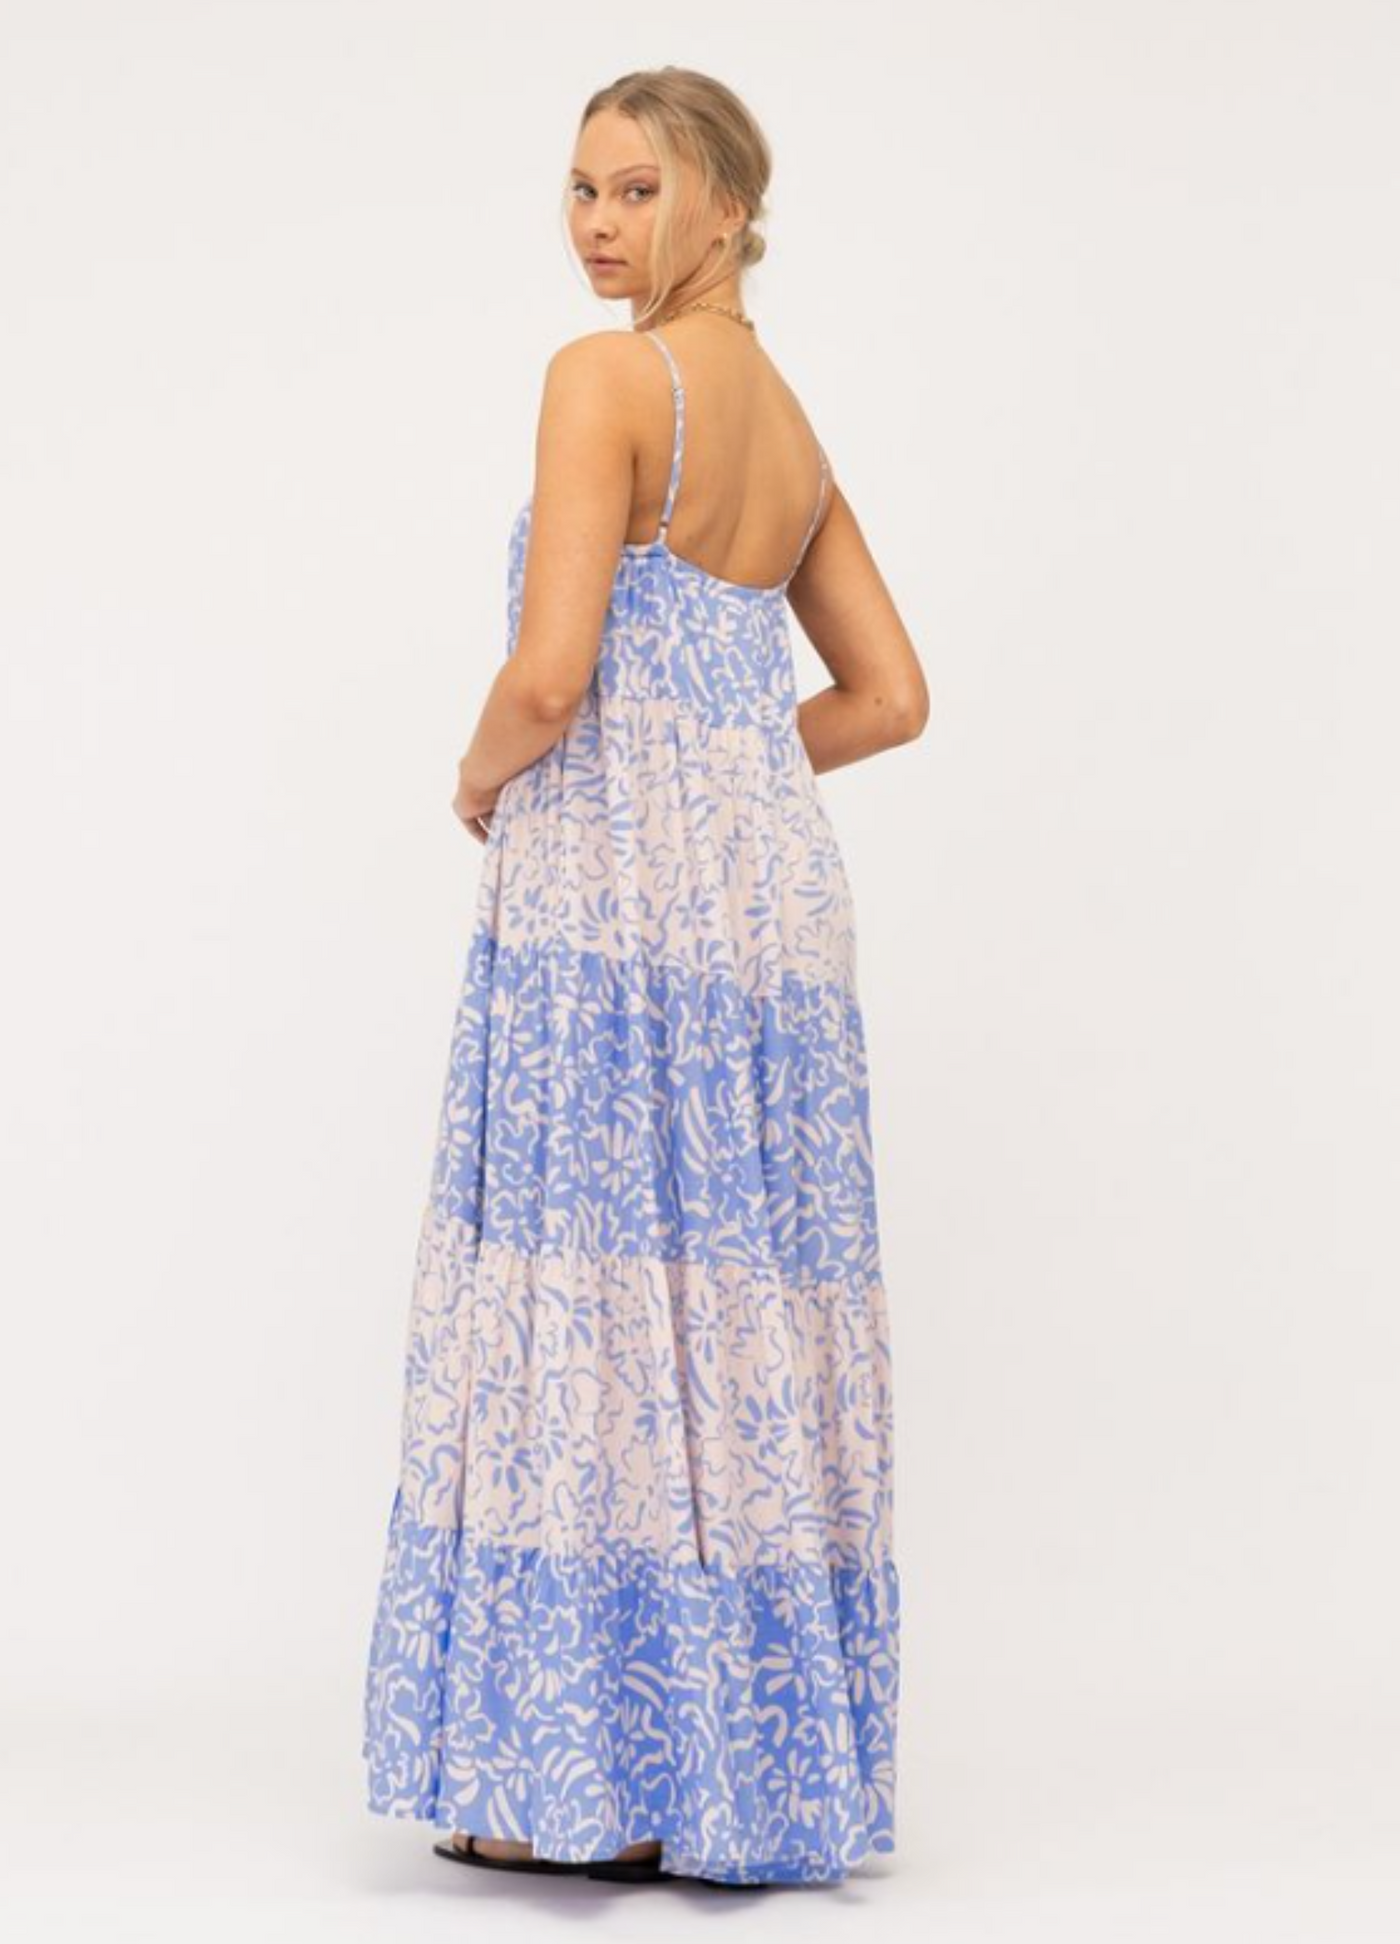 Model wearing tiered Livia Maxi Dress in blue and white mixed media print